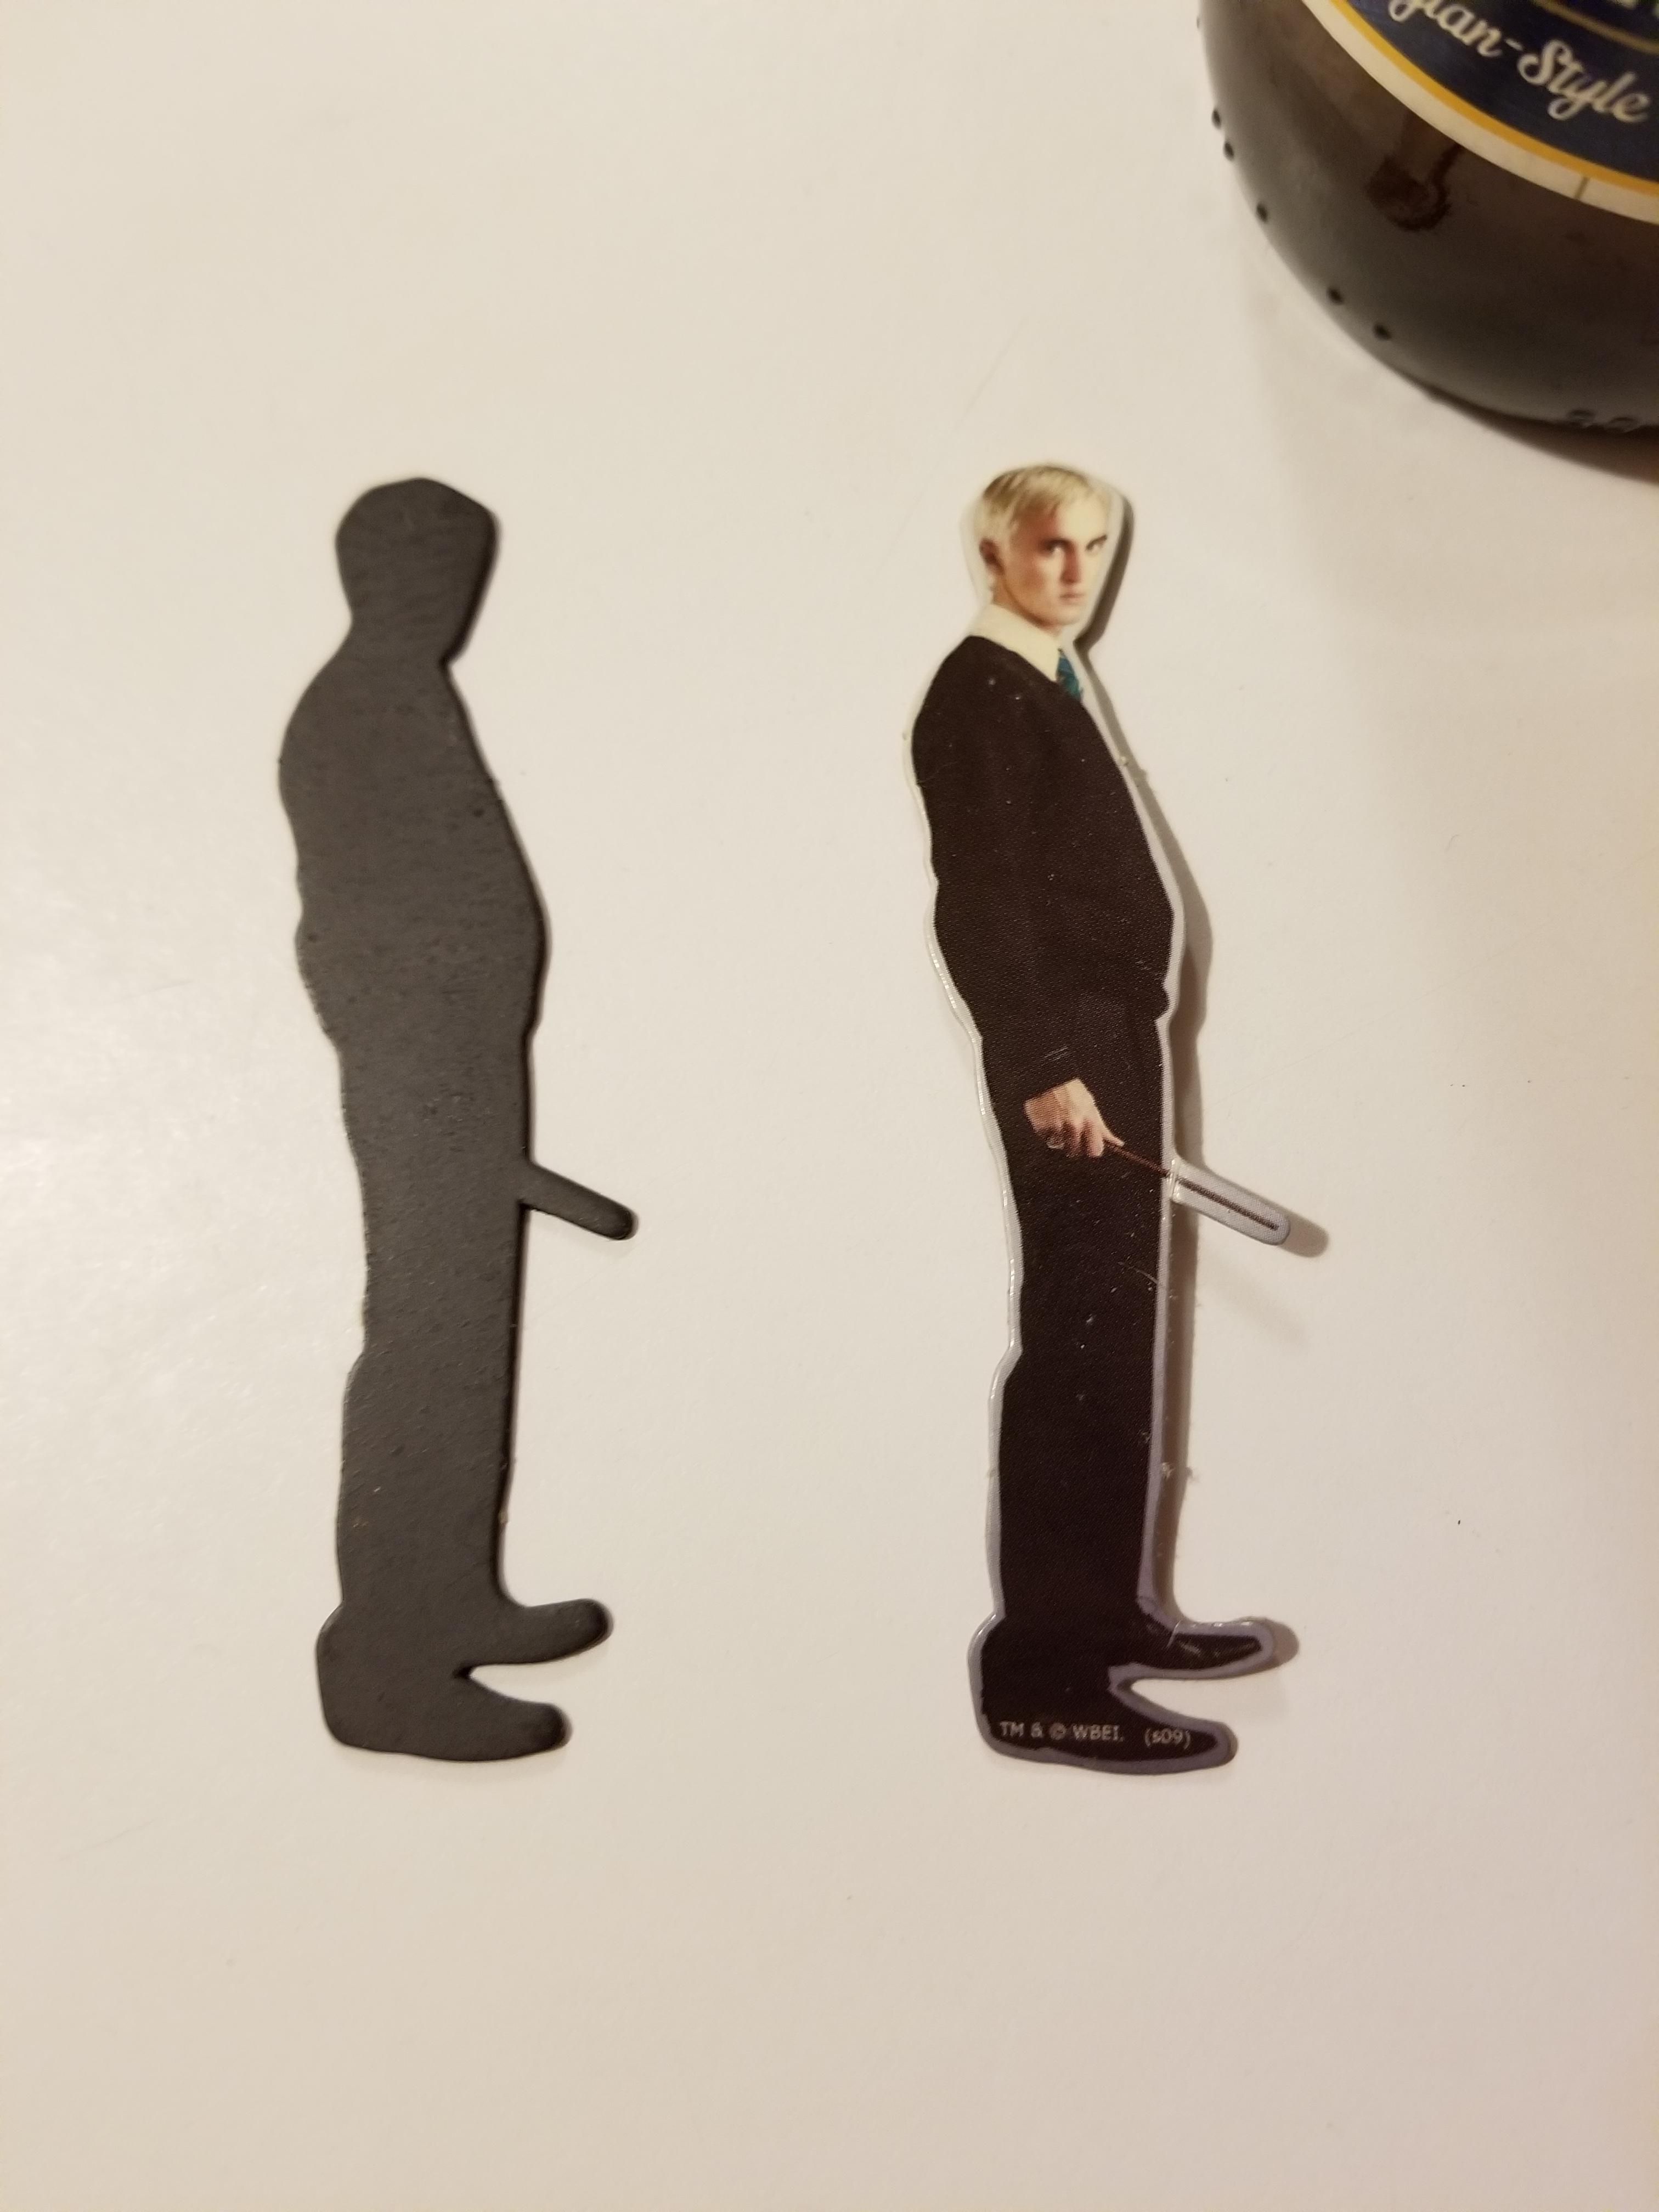 The Draco sticker fell off my magnet.